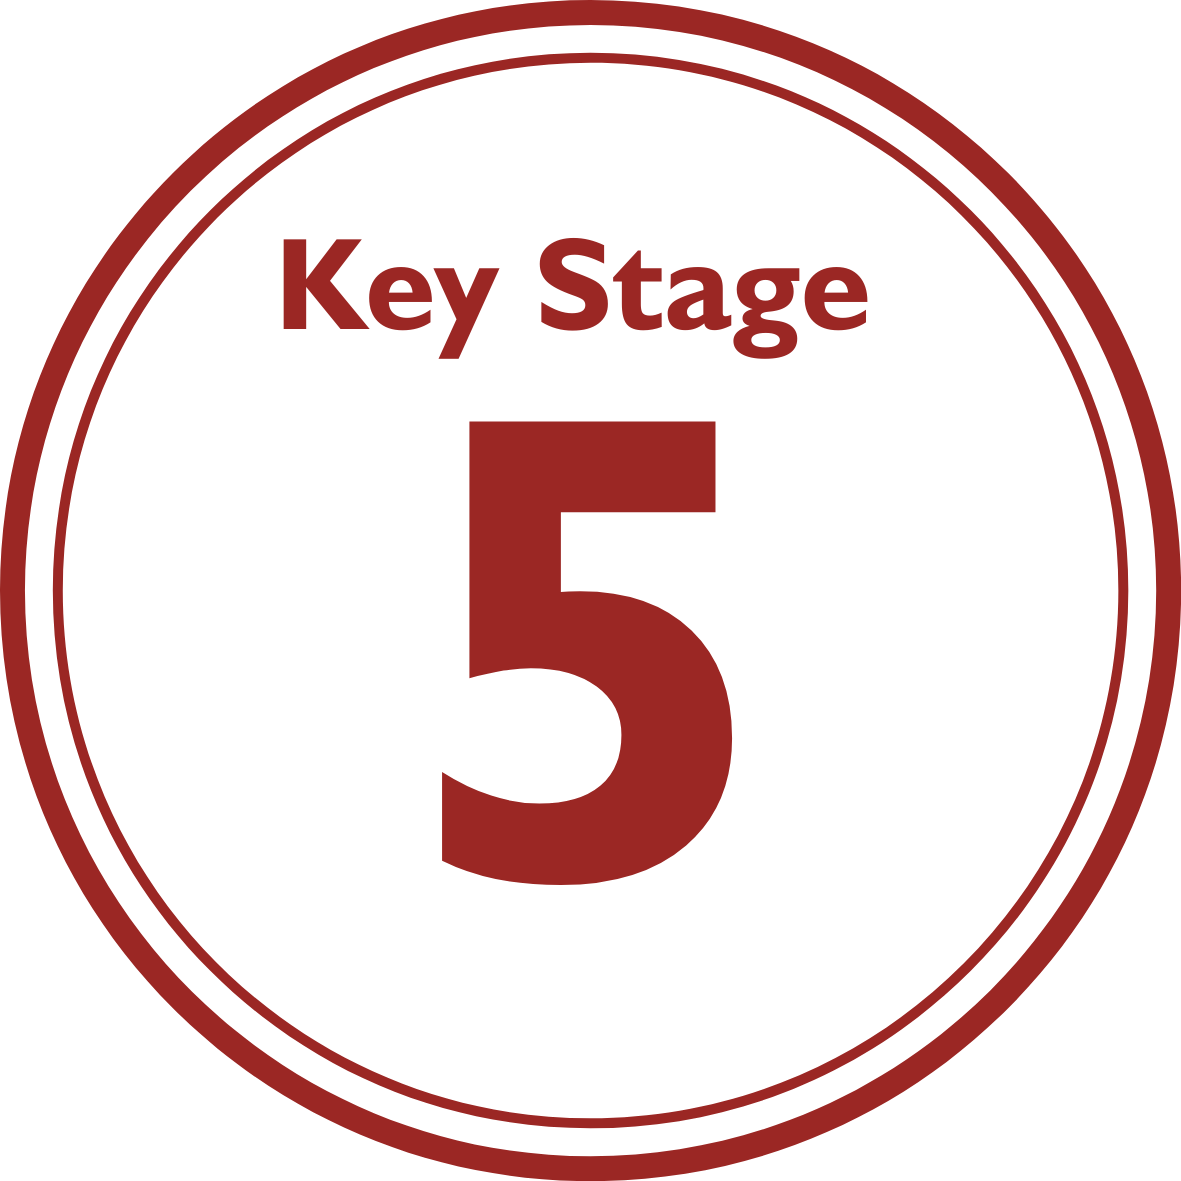 Key Stage 5 in a circle